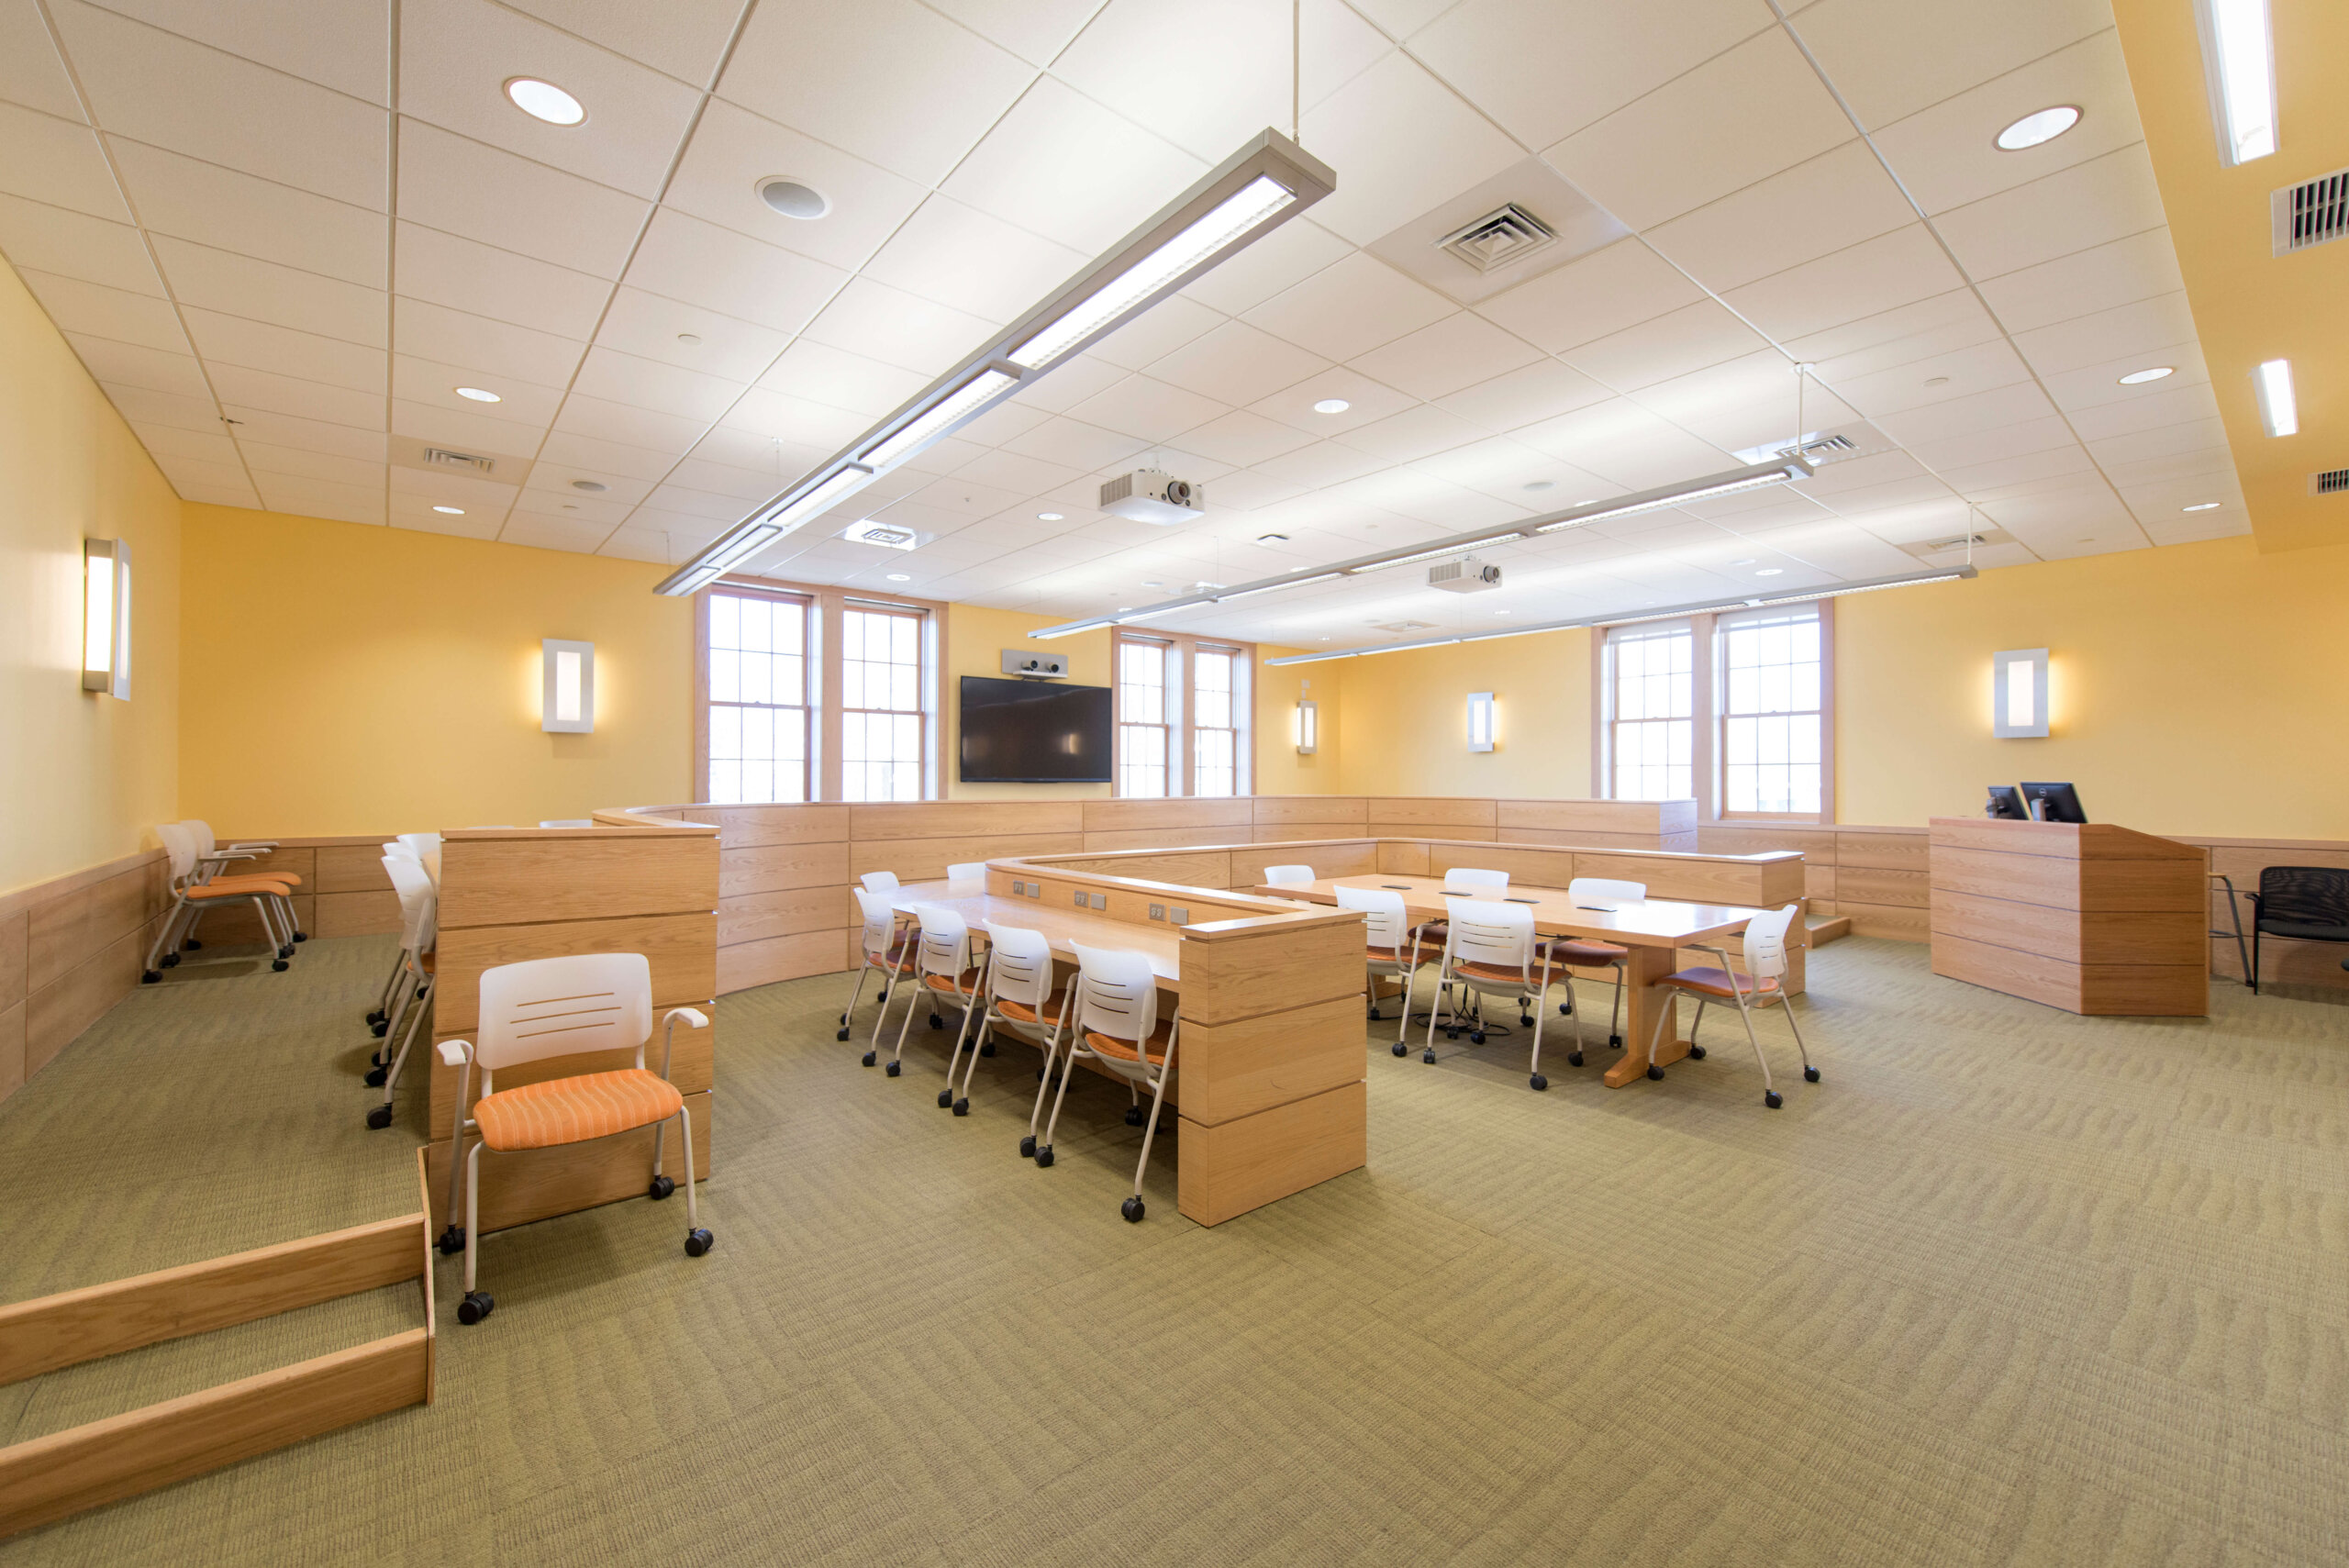 Photo of a classroom in the Lyons Center